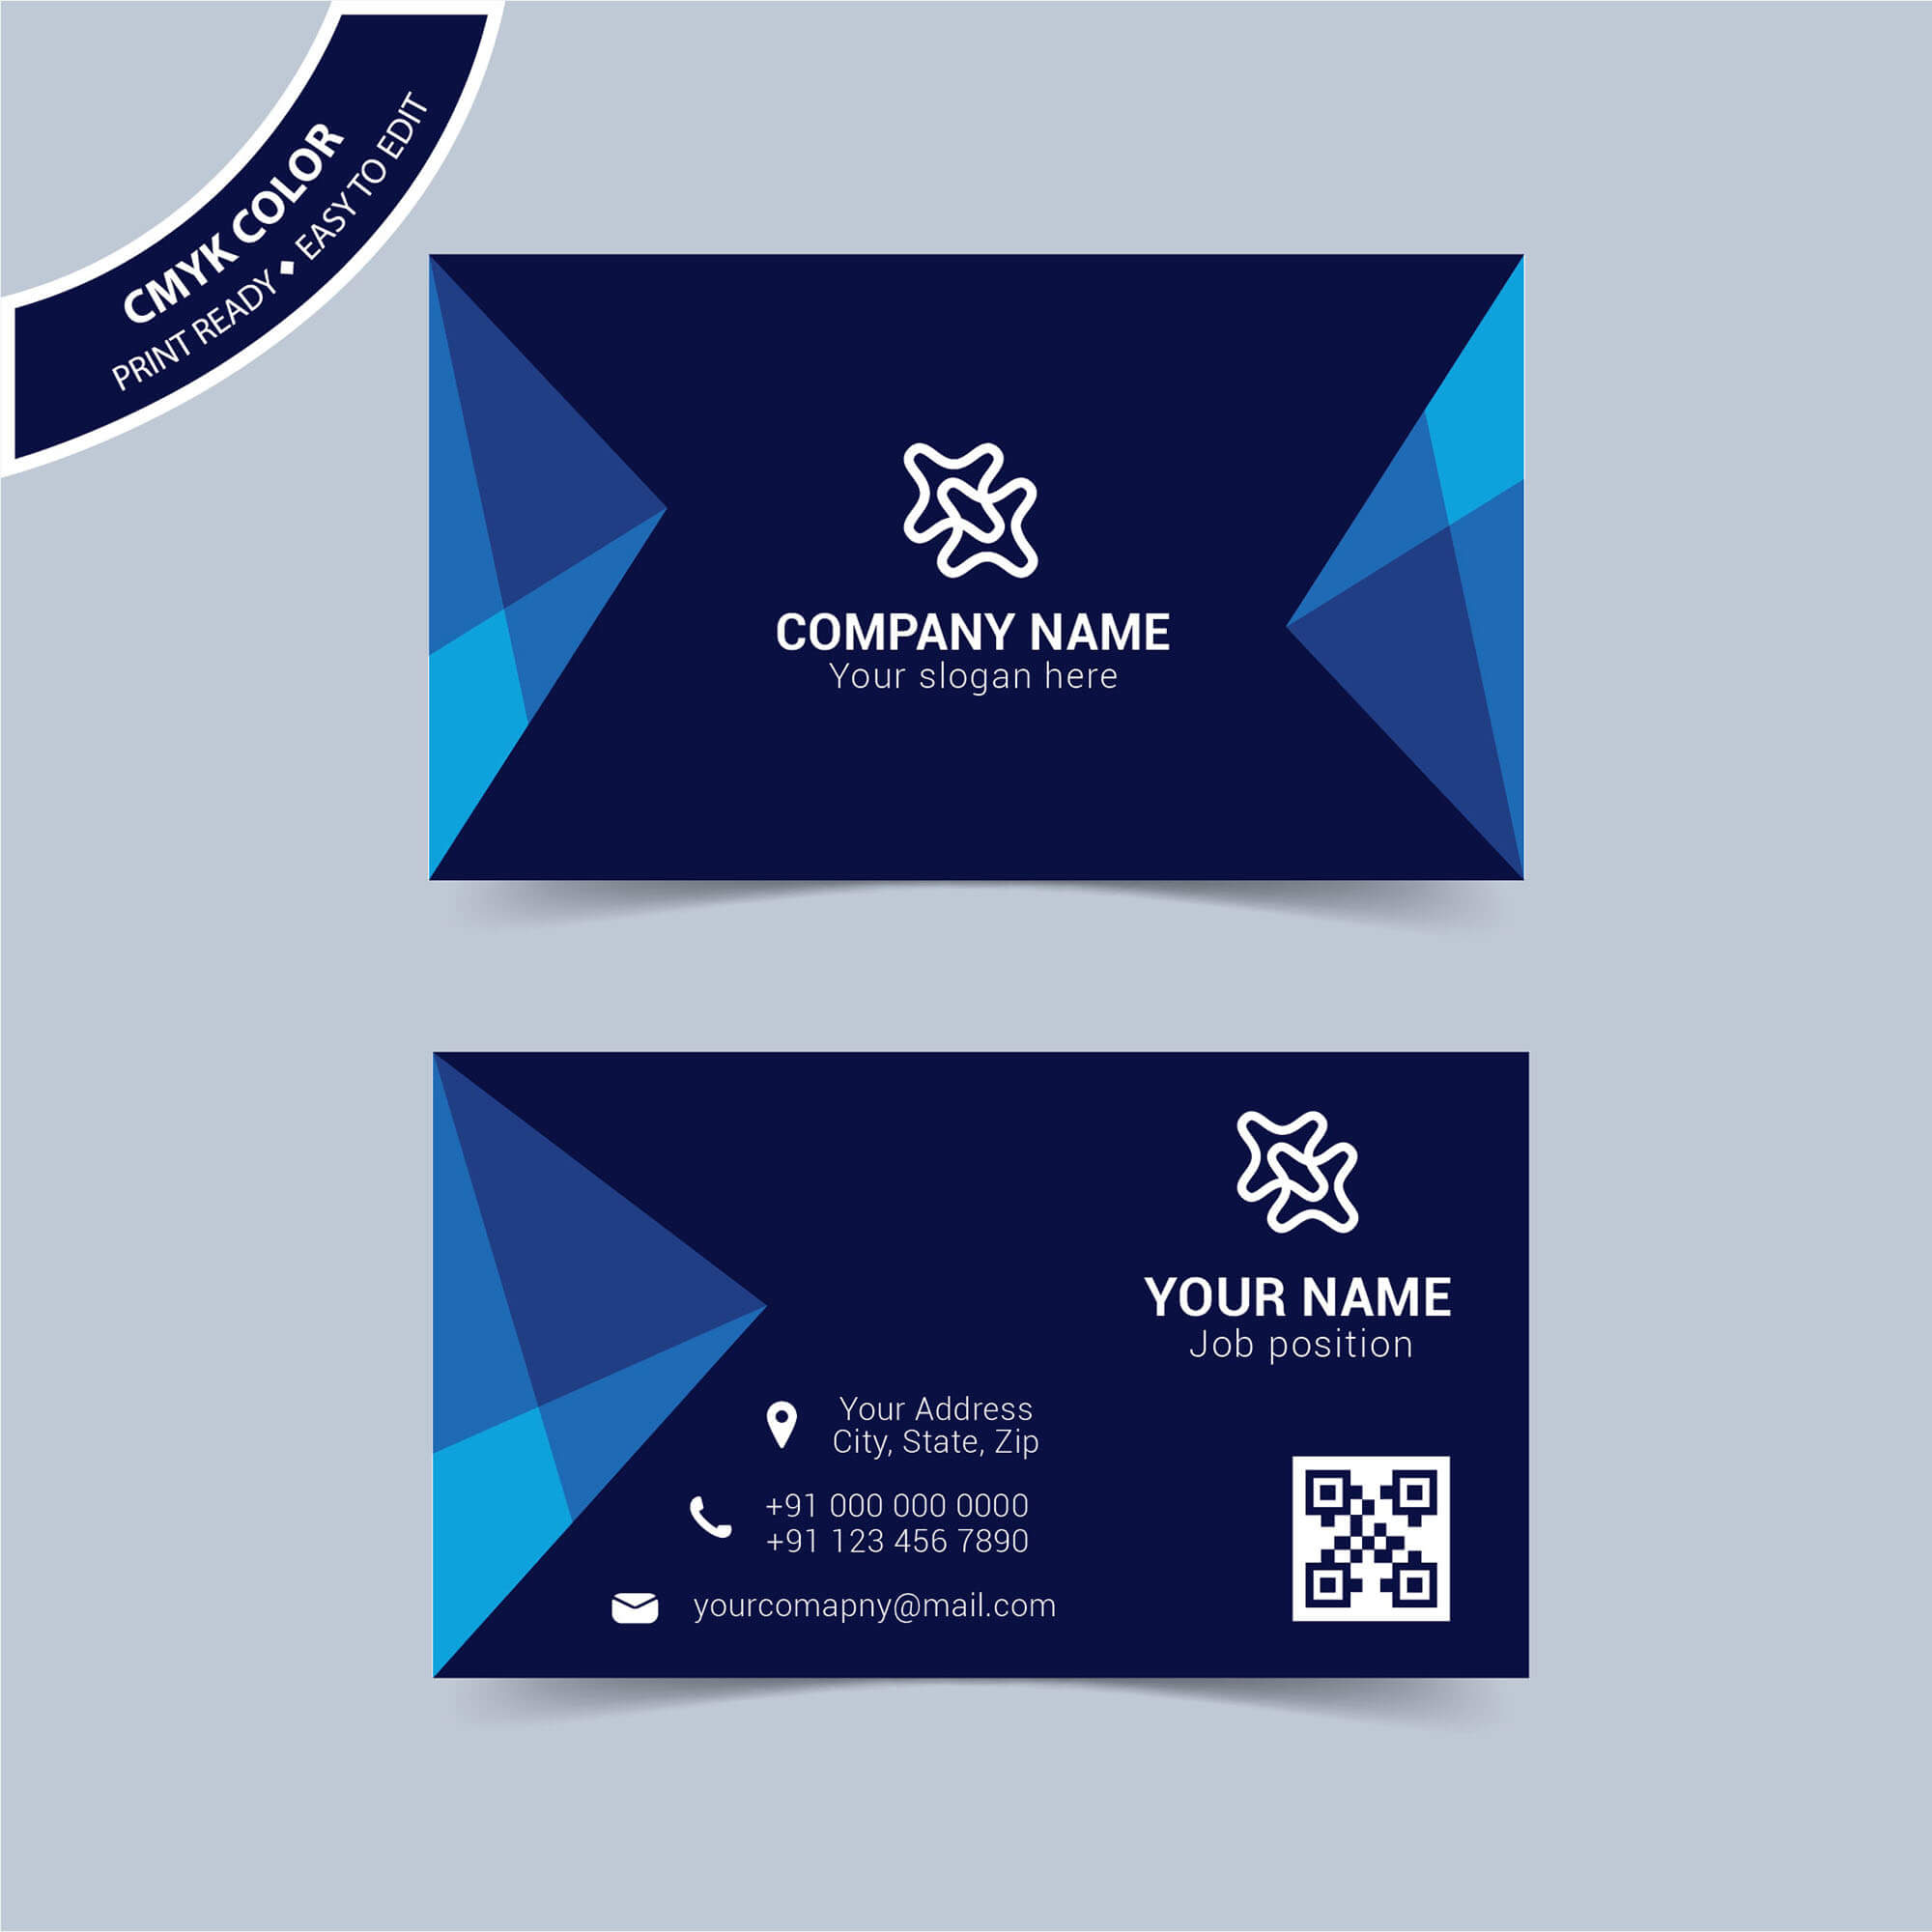 003 Template Ideas Download Business Card Templates Amazing Intended For Visiting Card Illustrator Templates Download